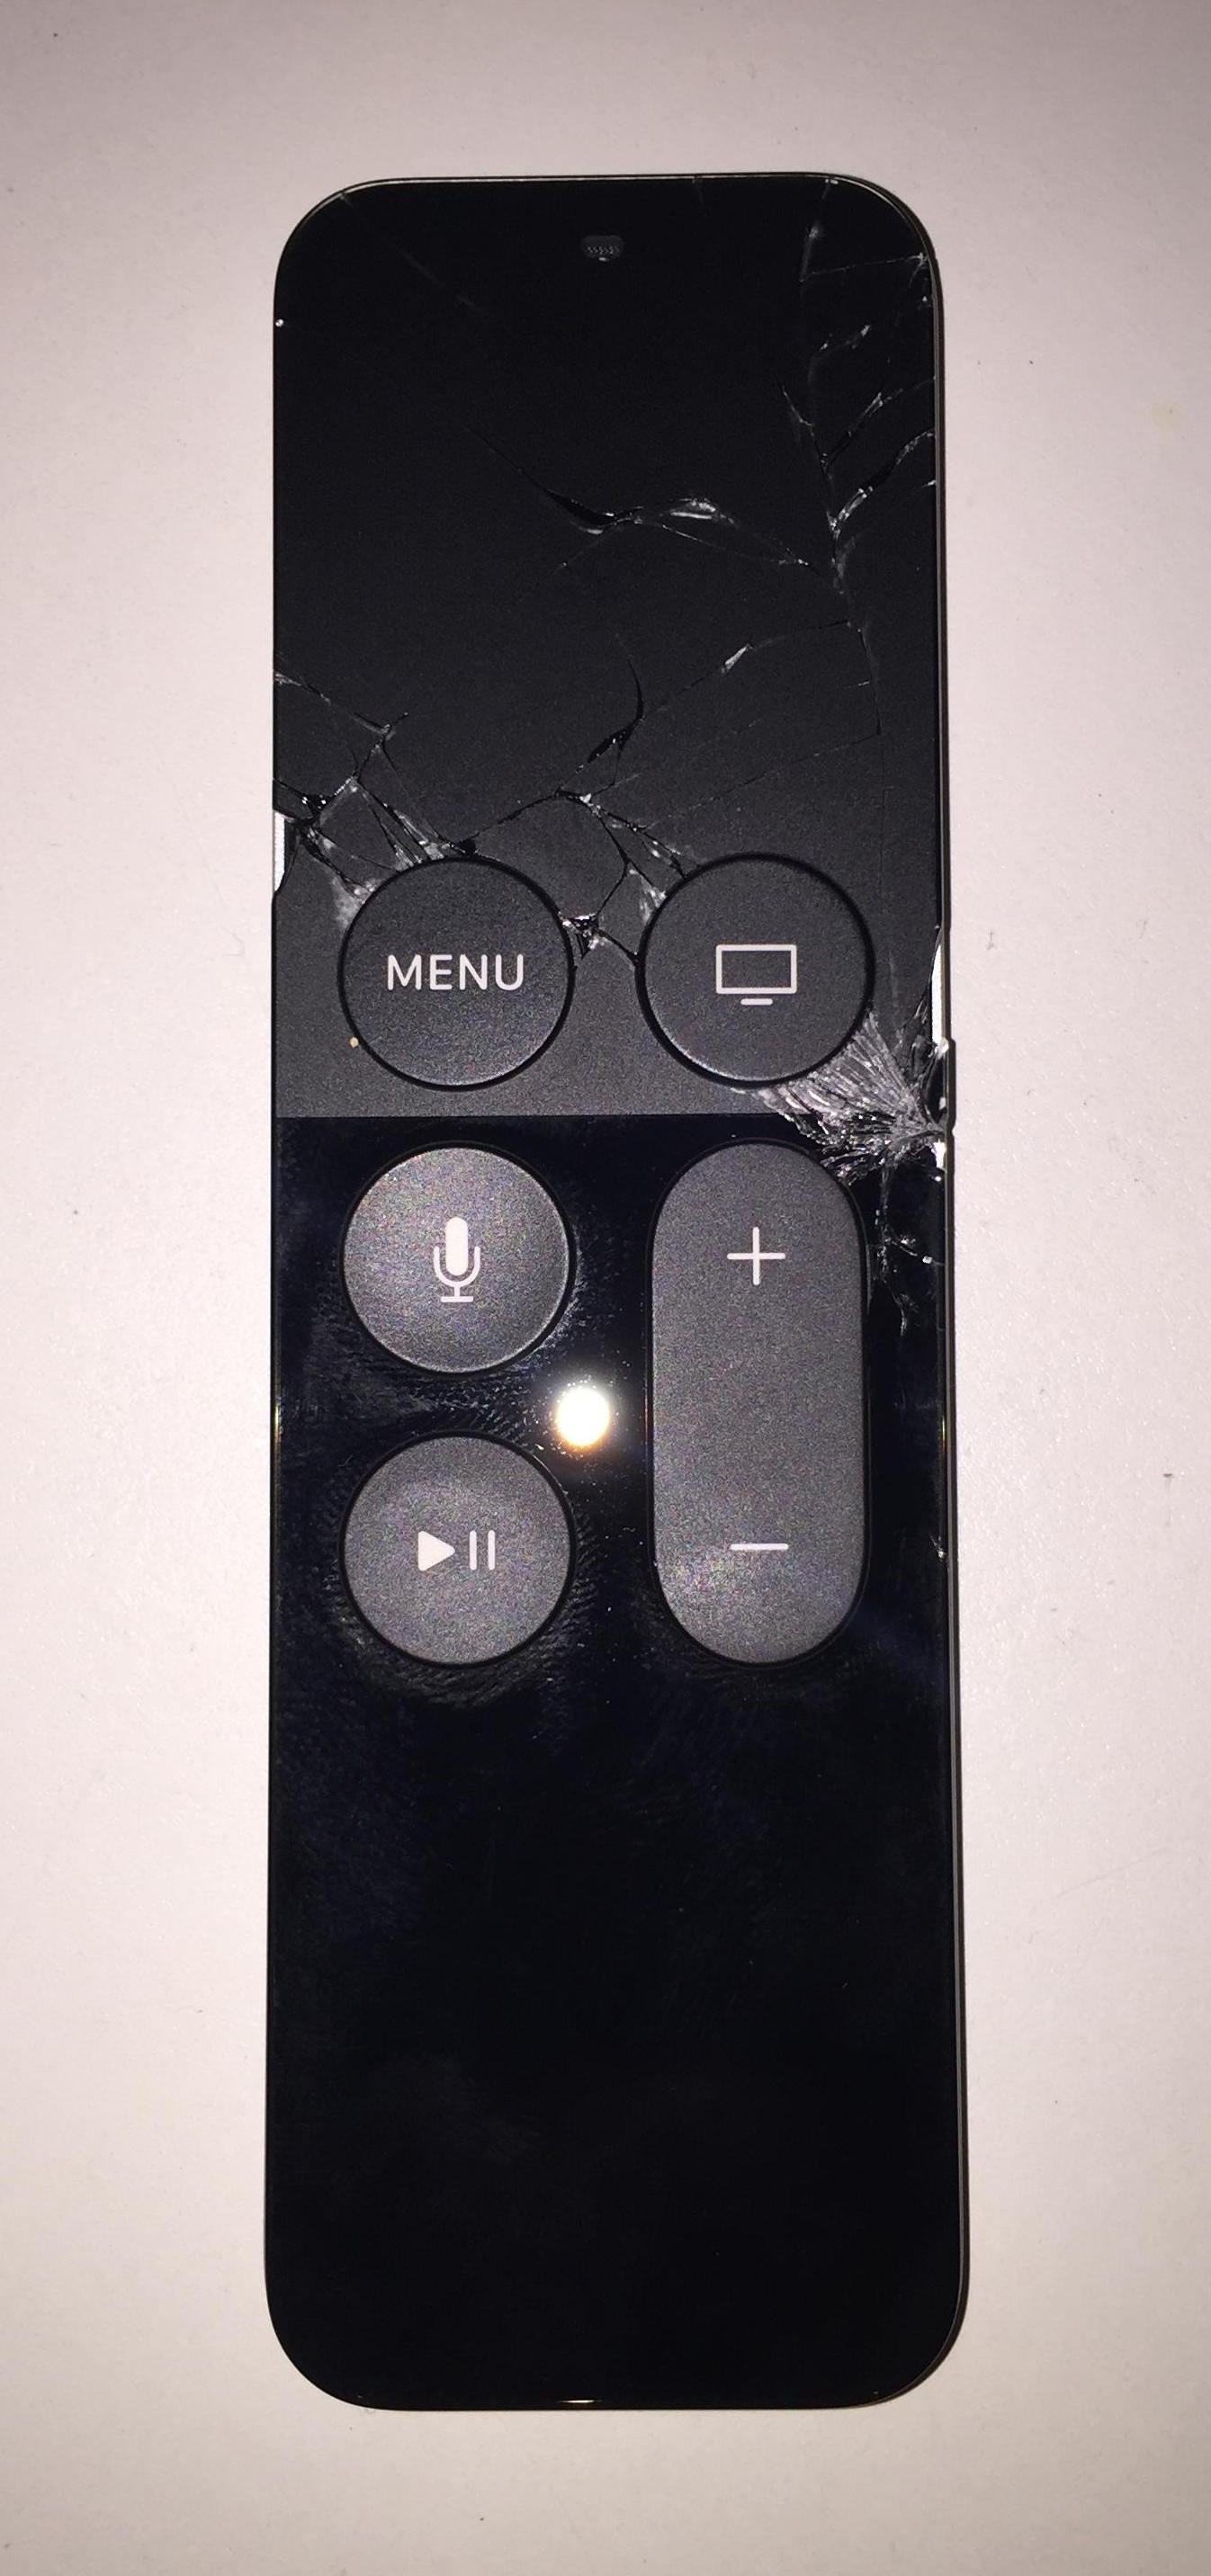 rester Mania variabel Warning: don't drop your new Apple TV remote | Mobile Fun Blog